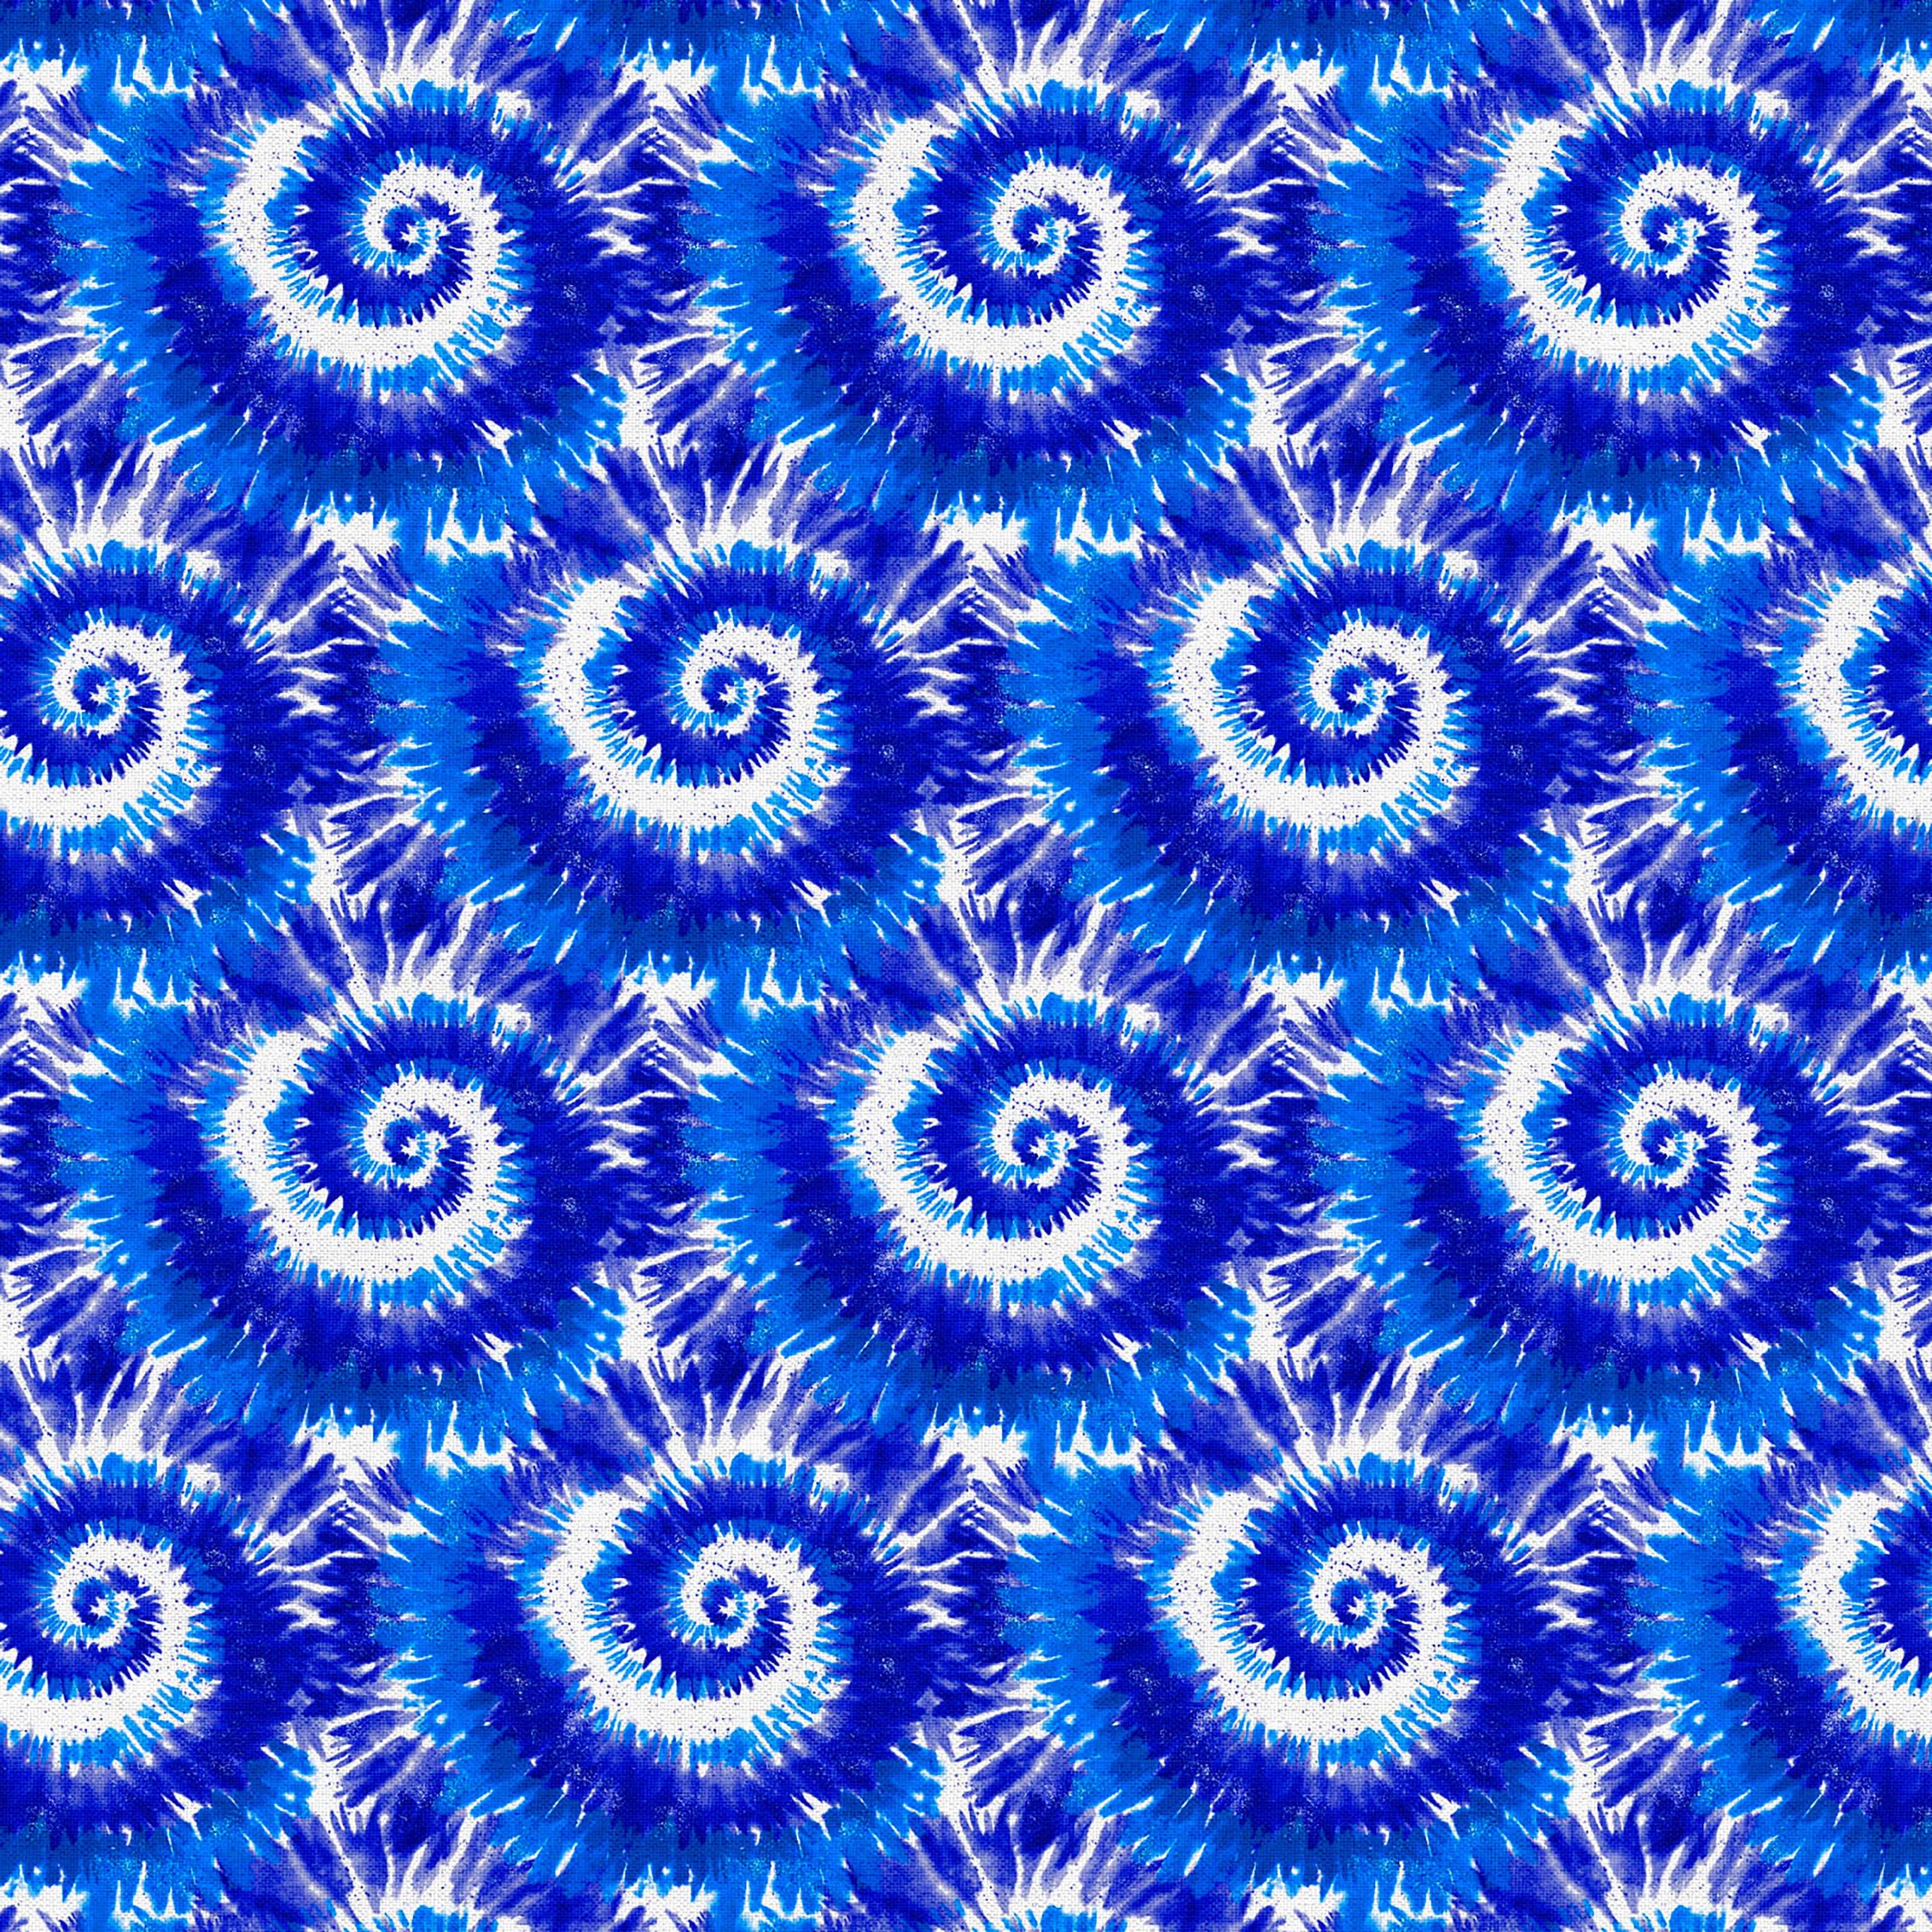 Fabric Editions Royal Blue Tie Dye Cotton Fabric